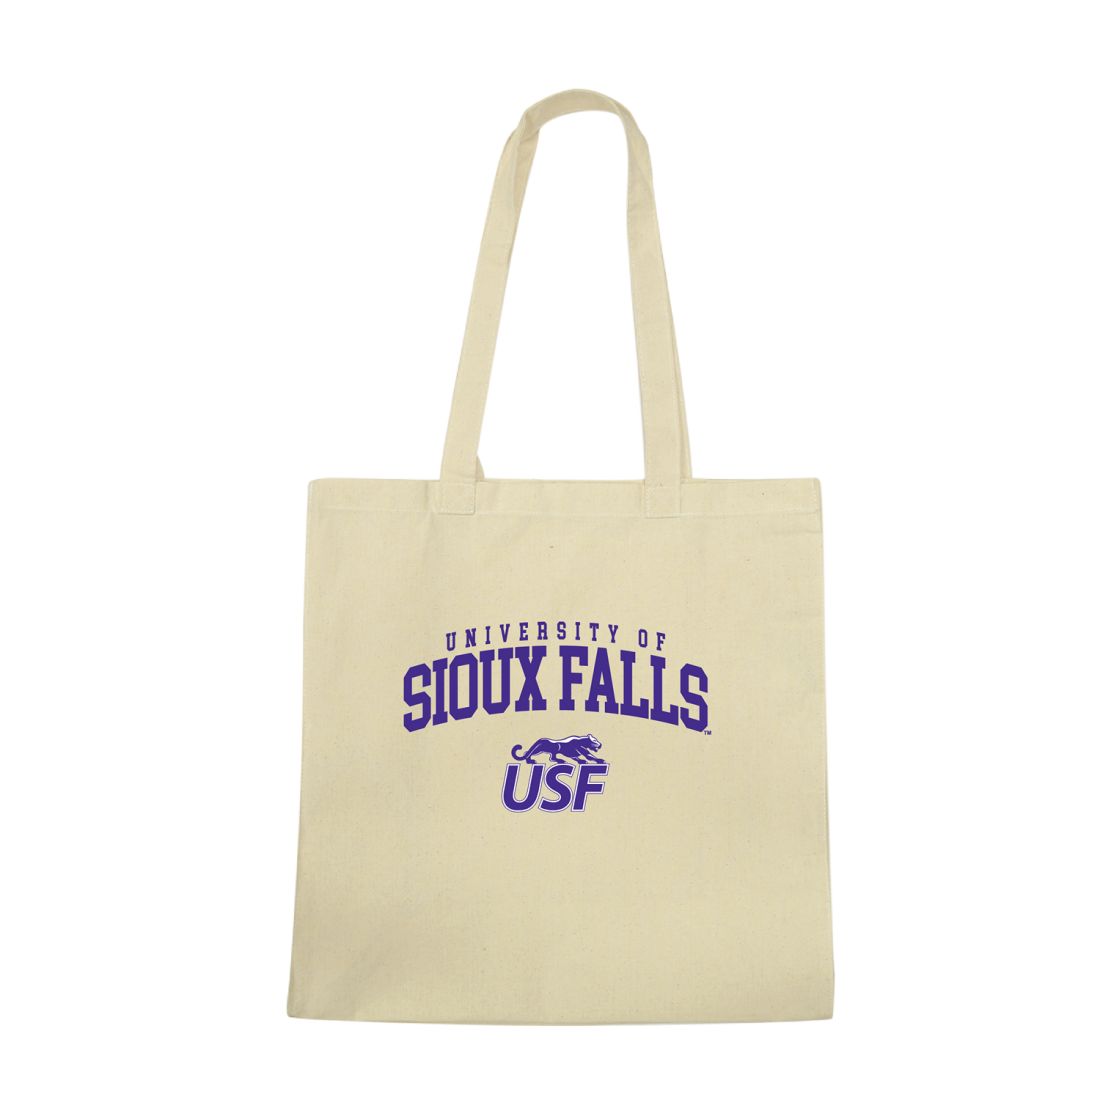 USF University of Sioux Falls Cougars Institutional Seal Tote Bag